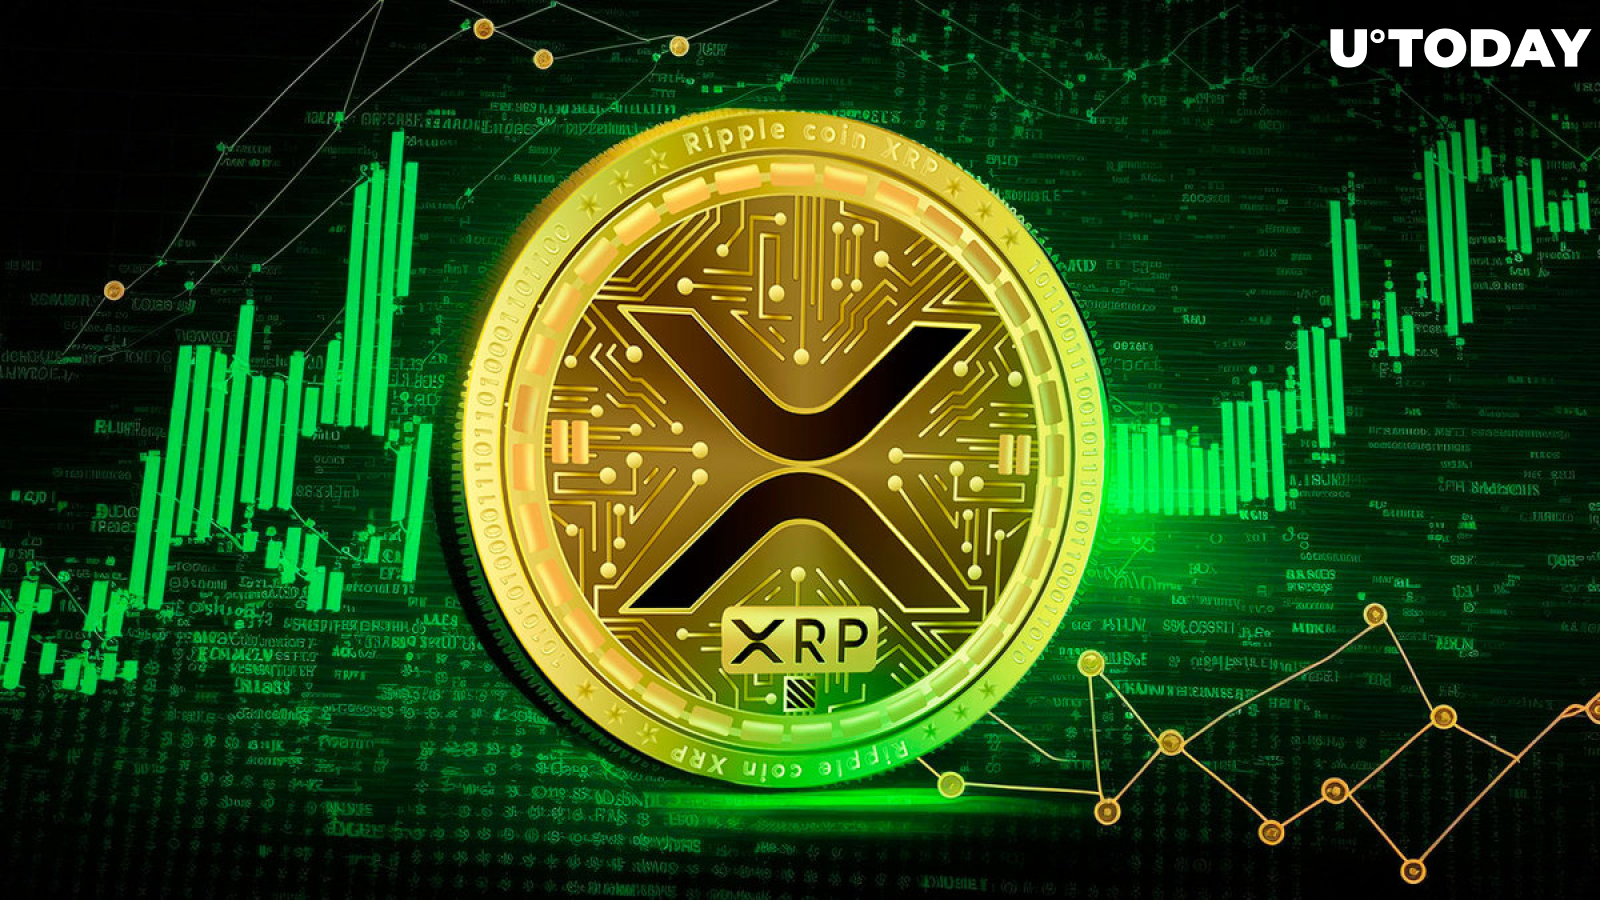 Ripple Transfers Almost 100 Million XRP, With Price Rising 10% Weekly